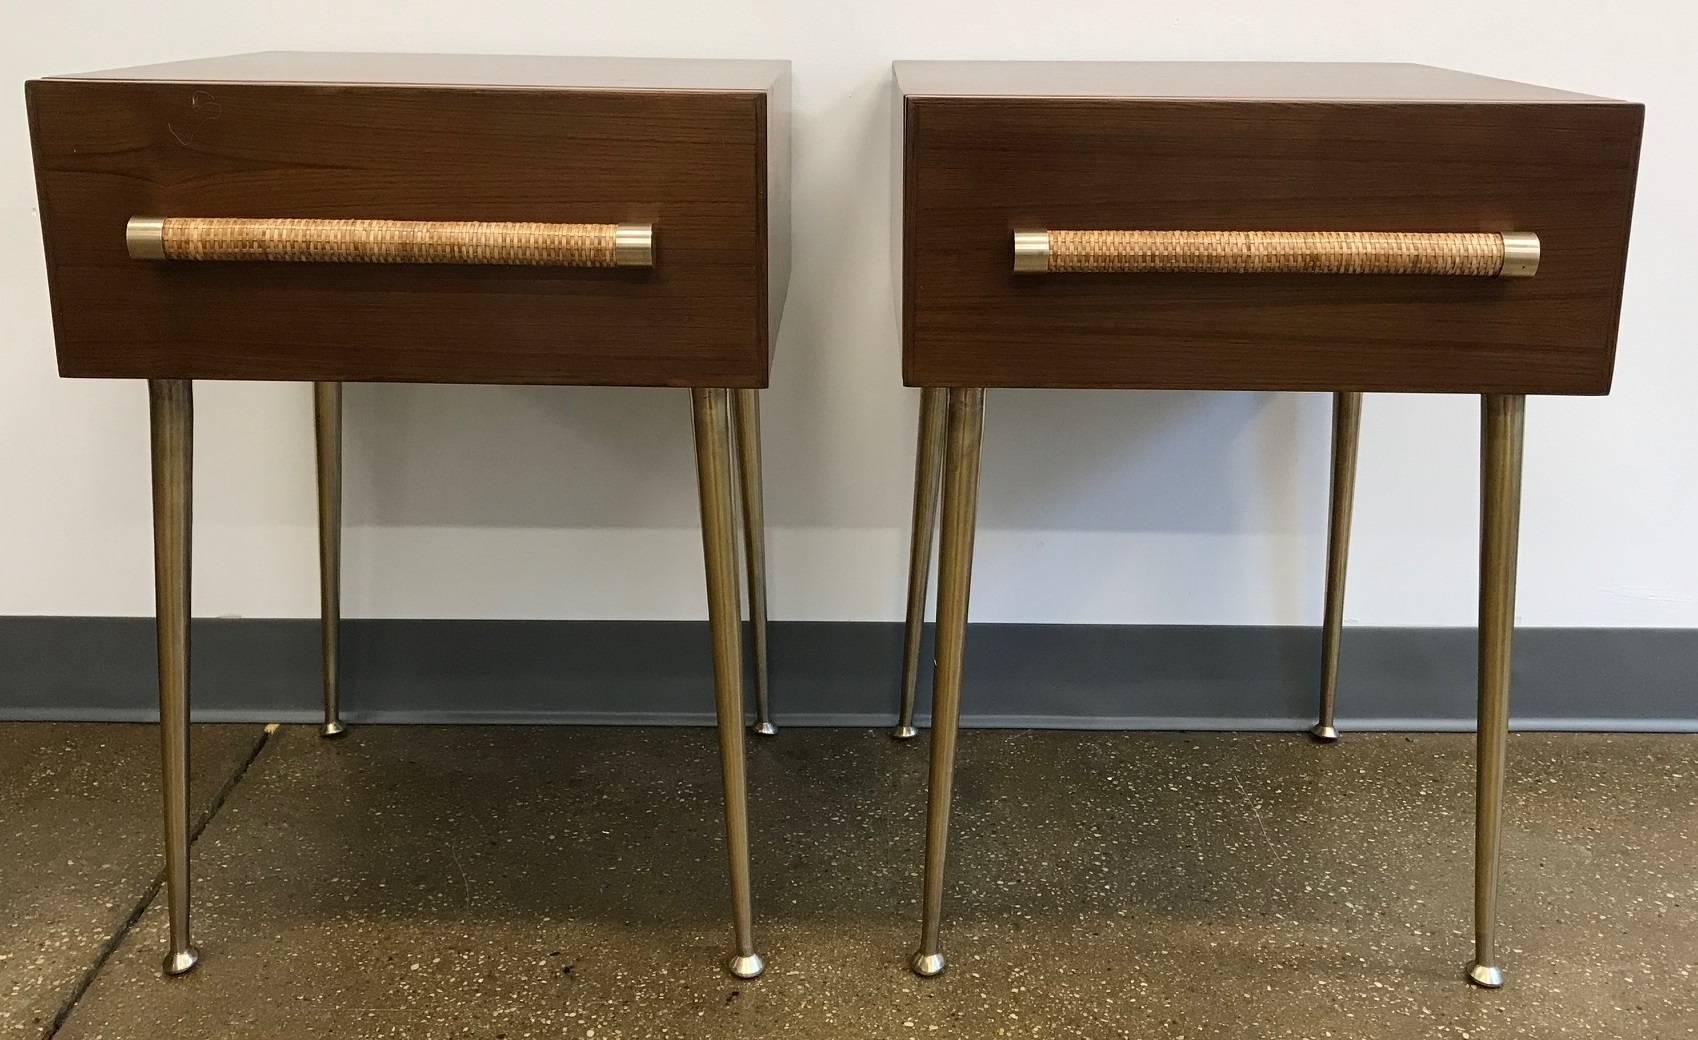 Pair of newly restored 1950's Robsjohn-Gibbings for Widdicomb single drawer side tables with bronze legs and cane wrapped drawer pulls.
Please contact us for any other information